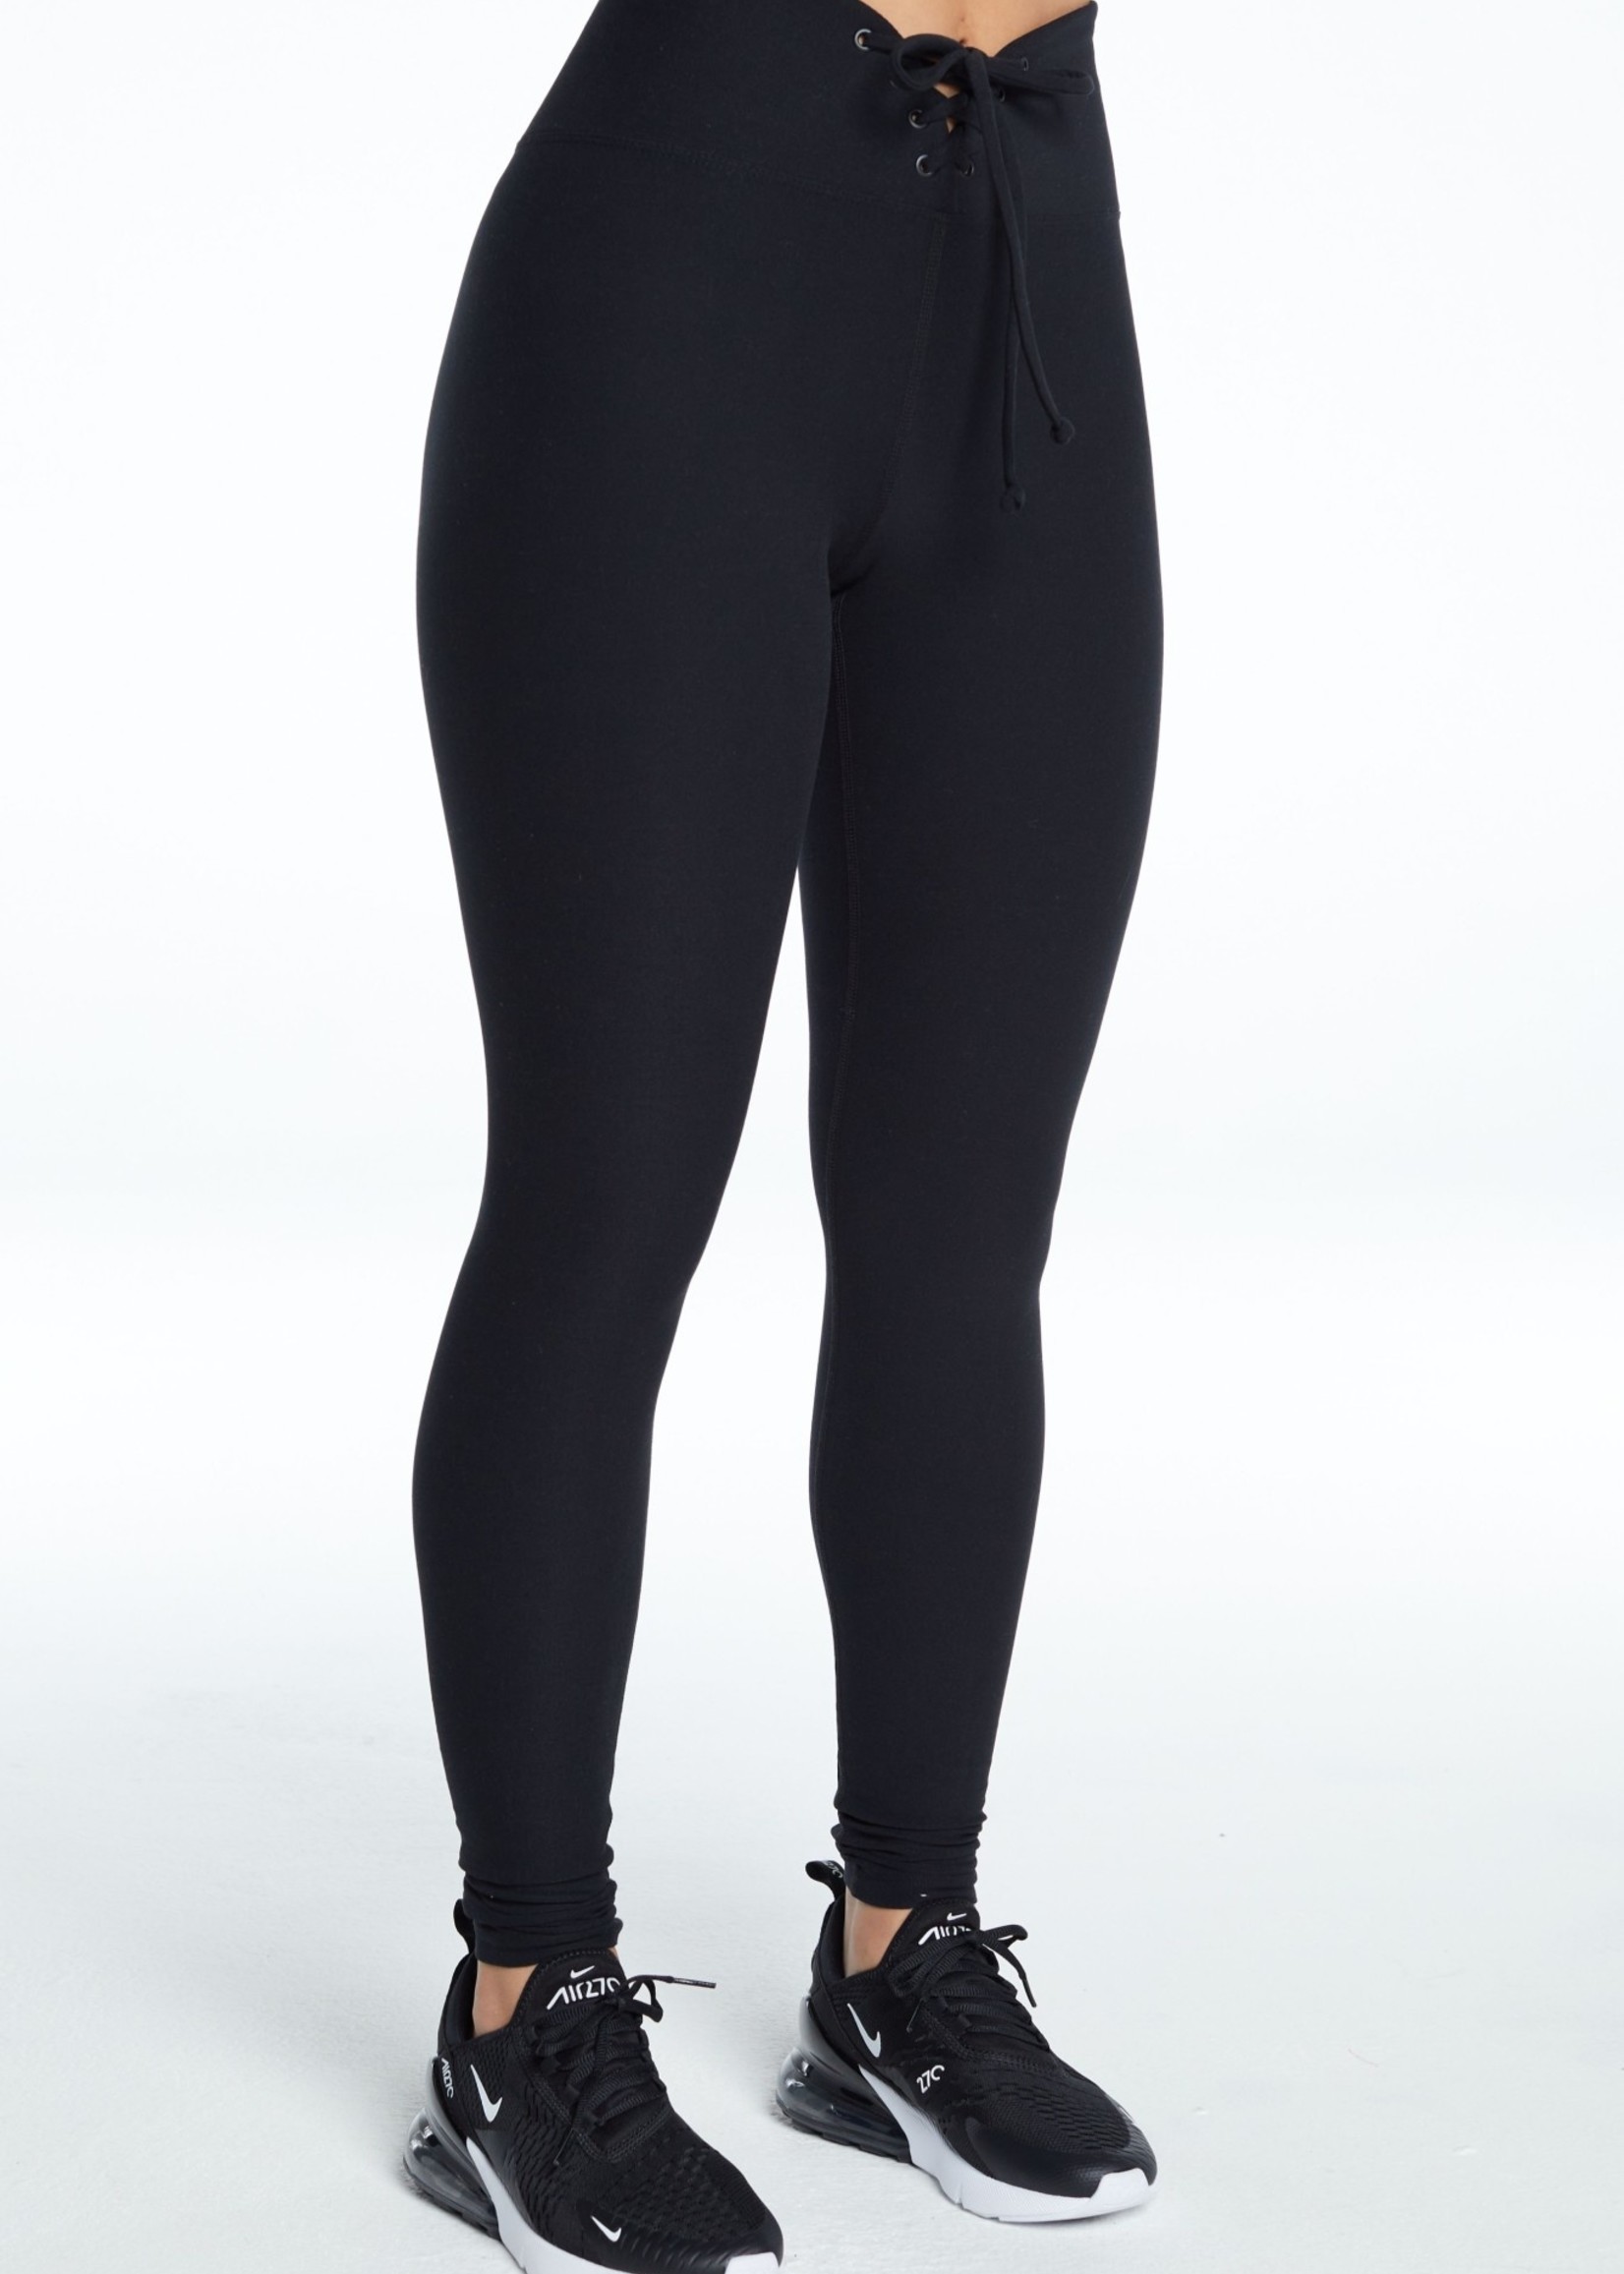 Year Of Ours Stretch Football Legging